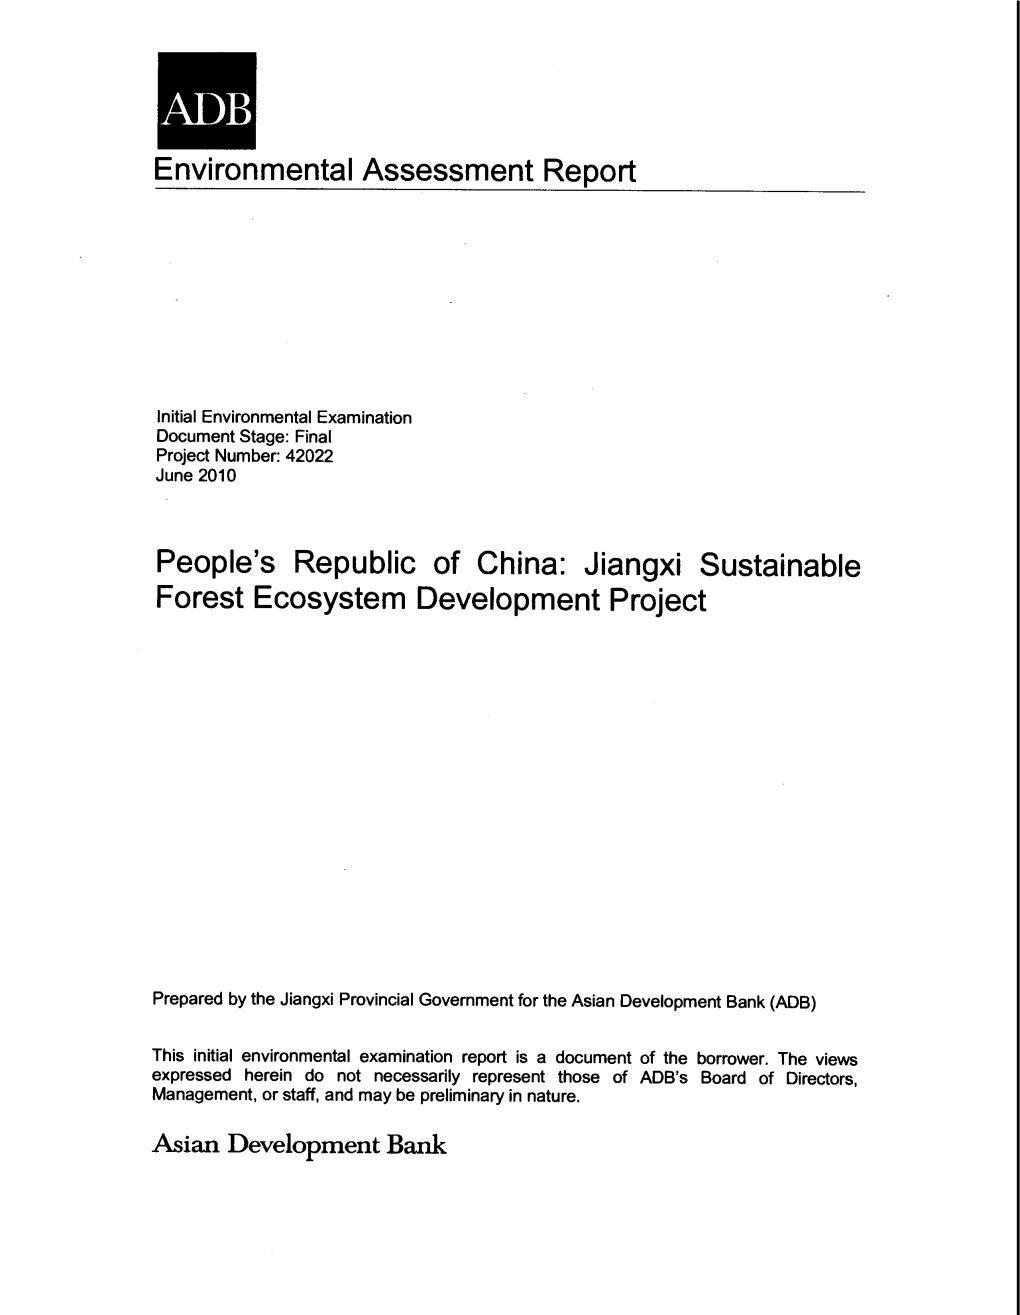 IEE: PRC: Jiangxi Sustainable Forest